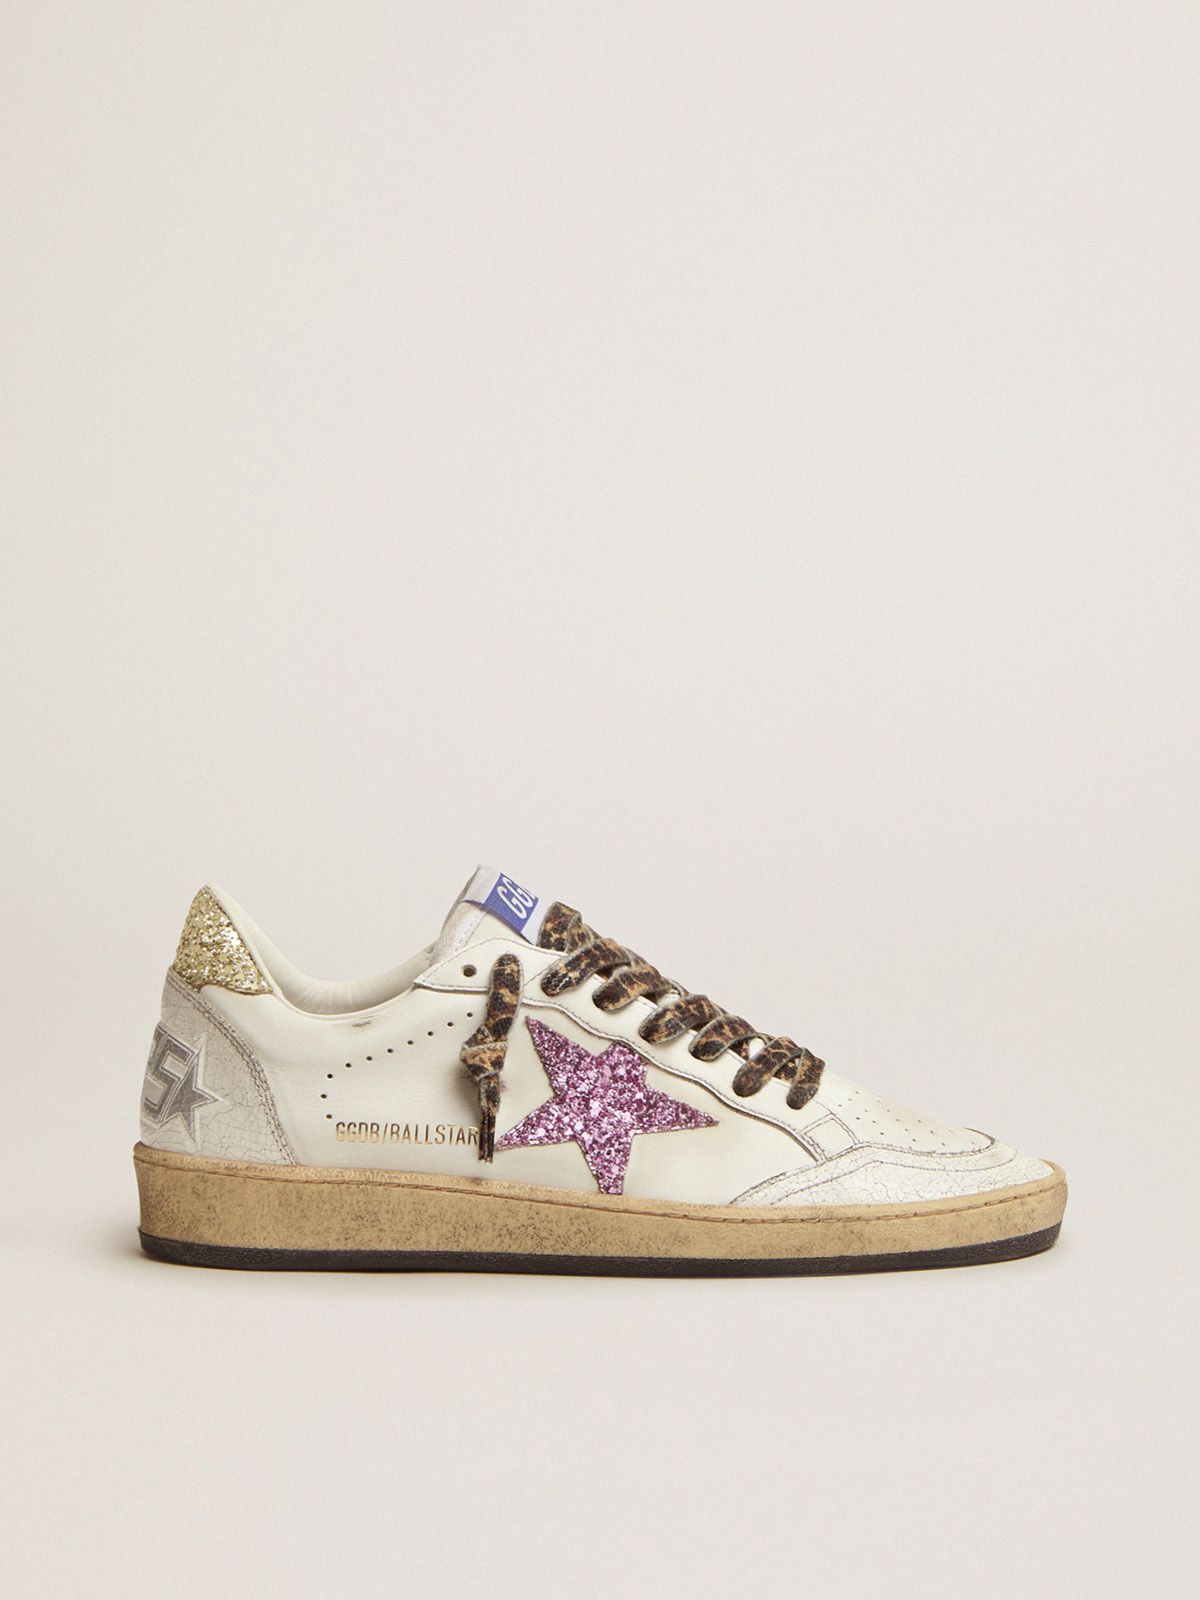 Golden Goose Sneakers Donna Ball Star LTD sneakers in white leather with colored glitter heel tab and star